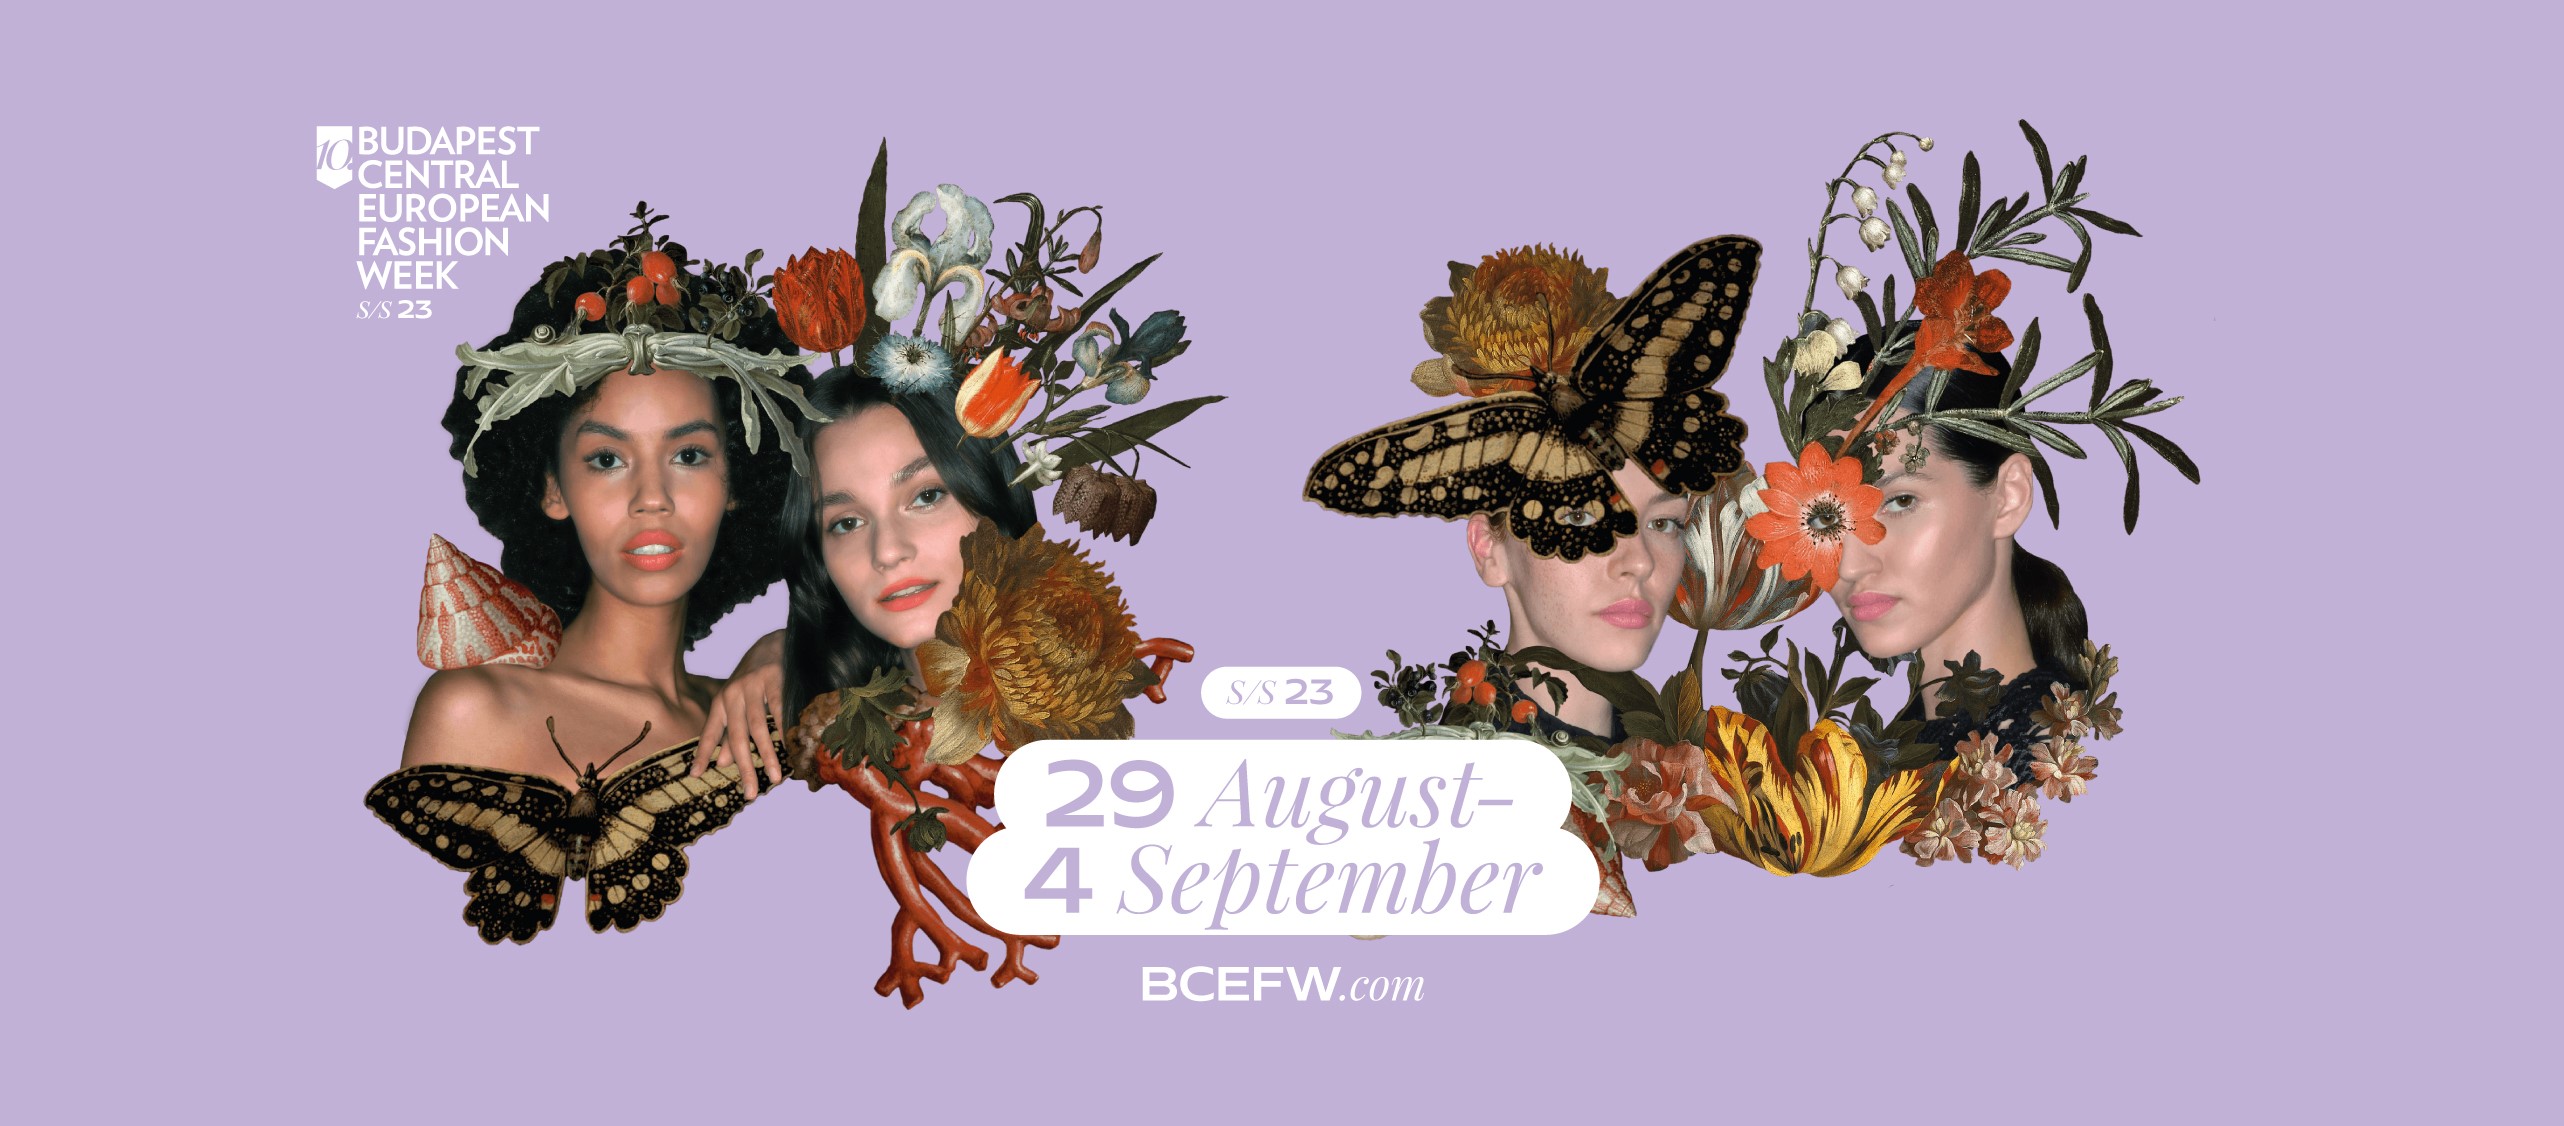 Budapest Central European Fashion Week, Museum of Fine Arts, 29 Aug – 4 Sept